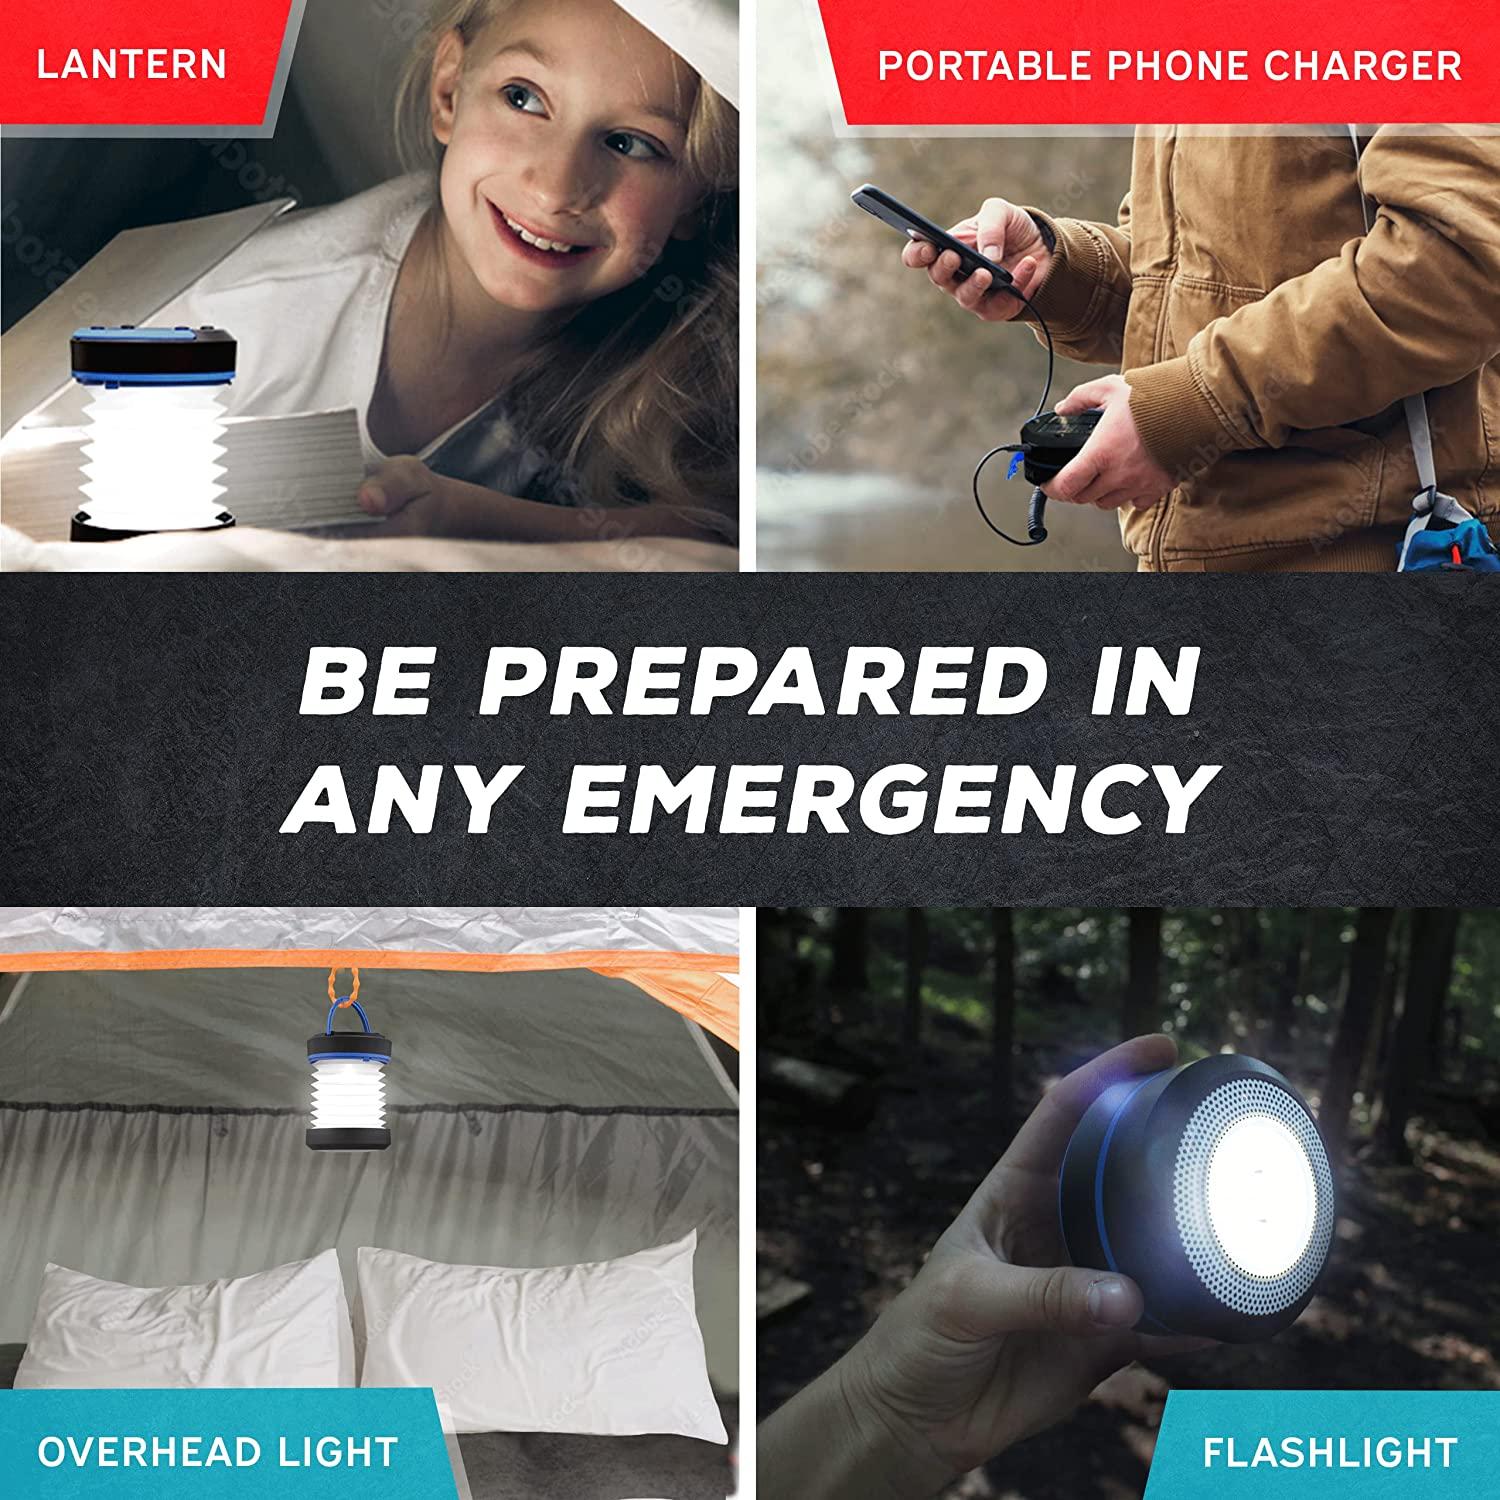 Solar Rechargeable Camping Lantern, Portable LED Camp Light Flashlight Lamp  : Product Review 